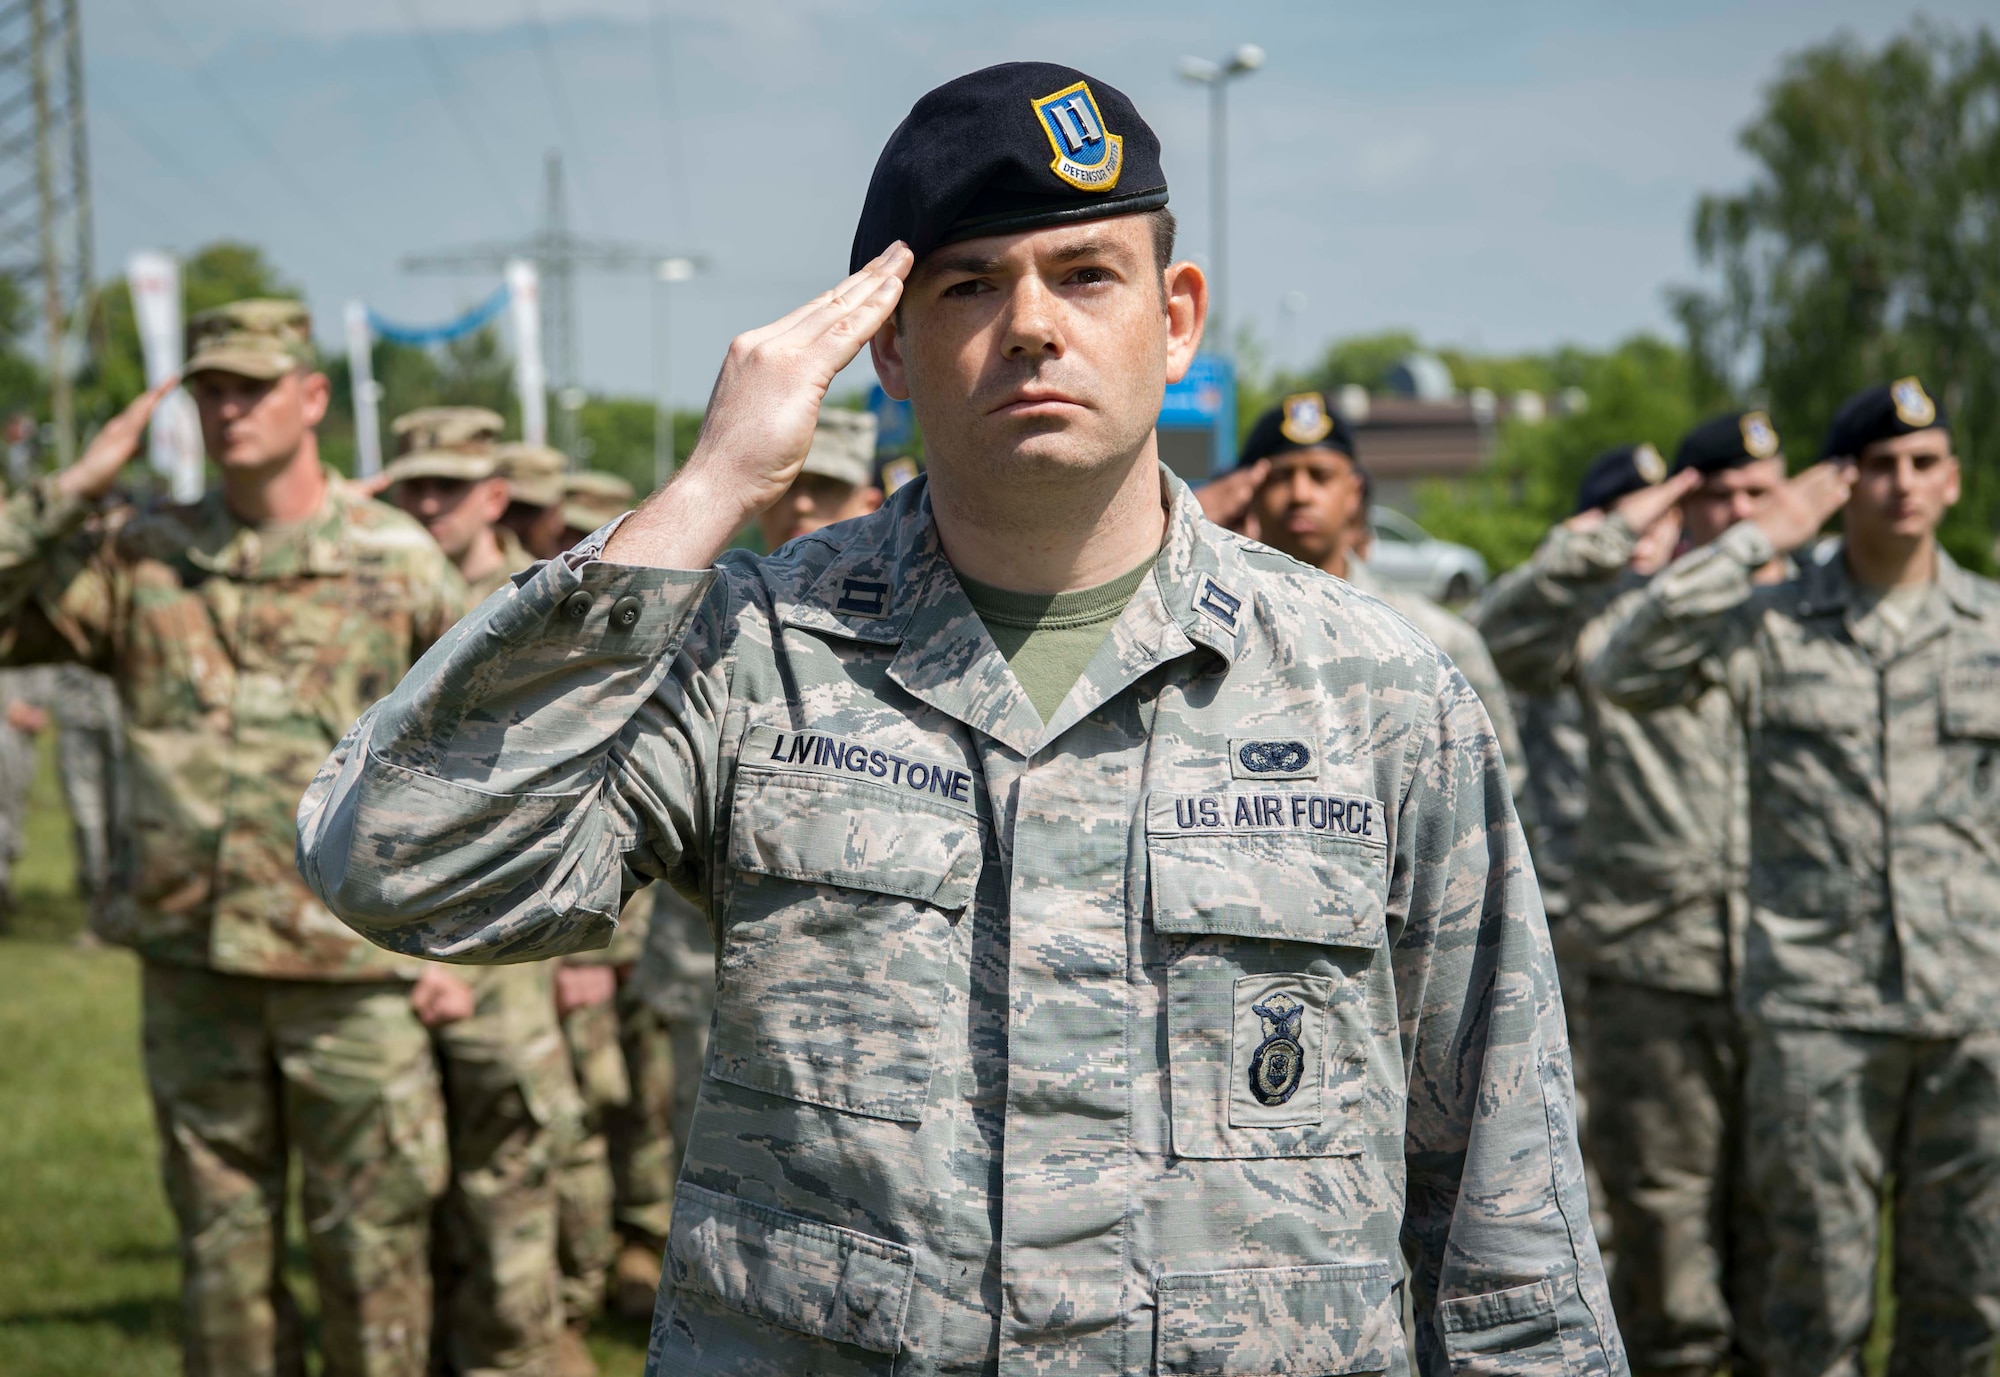 U.S. Airmen render salute as an American flag lowers during a retreat ceremony as part of Police Week 2018 on Vogelweh Air Station, Germany, May 18, 2018. The Kaiserslautern Military Community U.S. armed forces police services perform a retreat ceremony every year during Police Week to remember and honor fallen members of the police services brotherhood. (U.S. Air Forces photo by Senior Airman Elizabeth Baker)